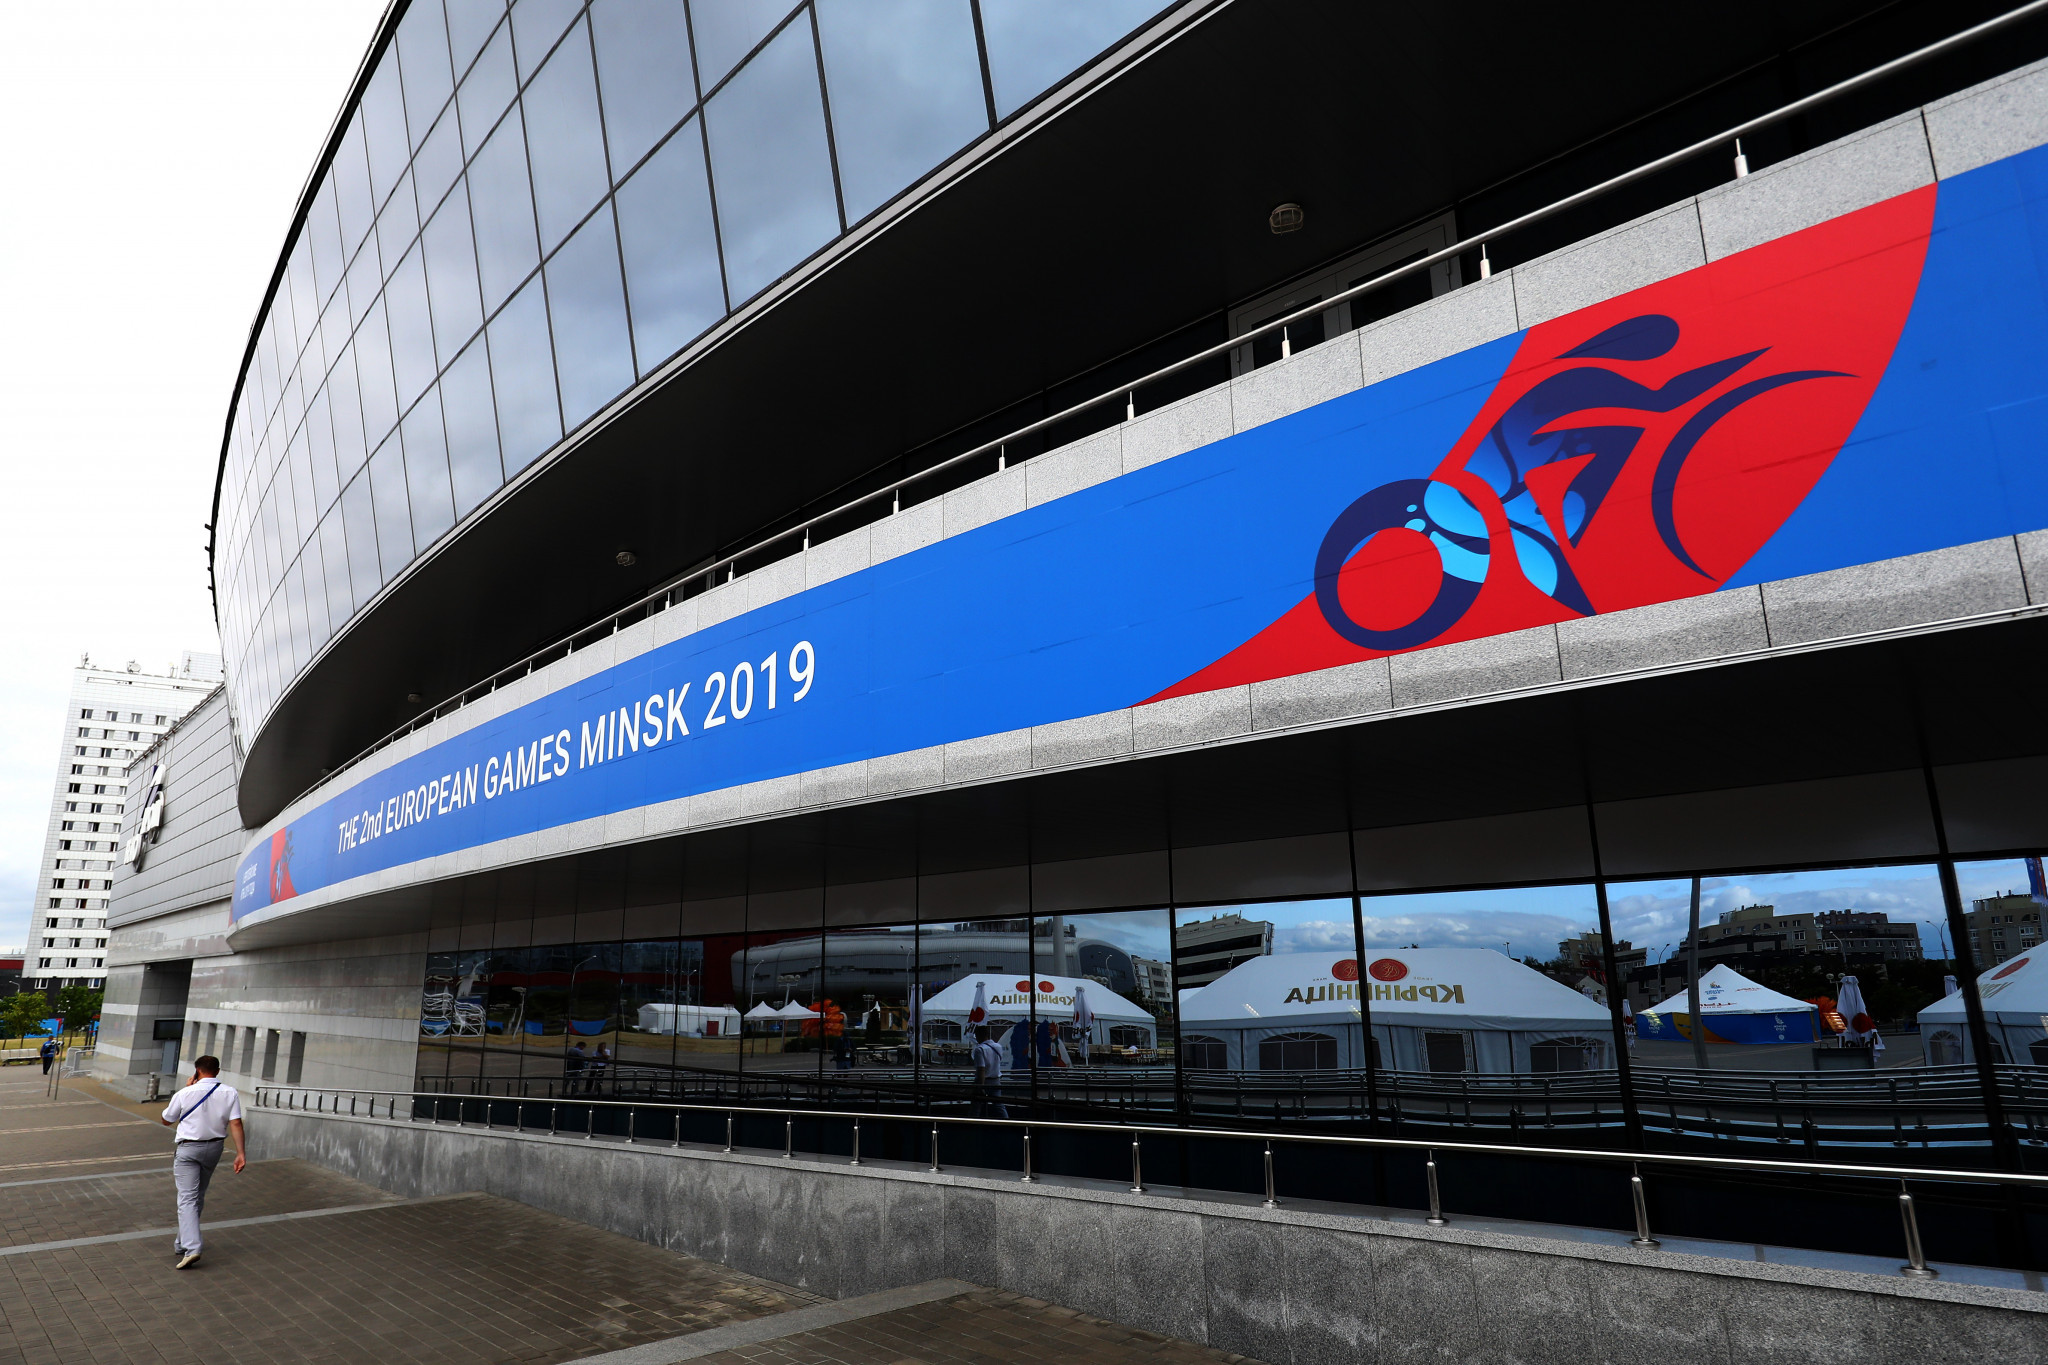 The Minsk Arena hosted track cycling competition at the European Games in 2019 ©Getty Images